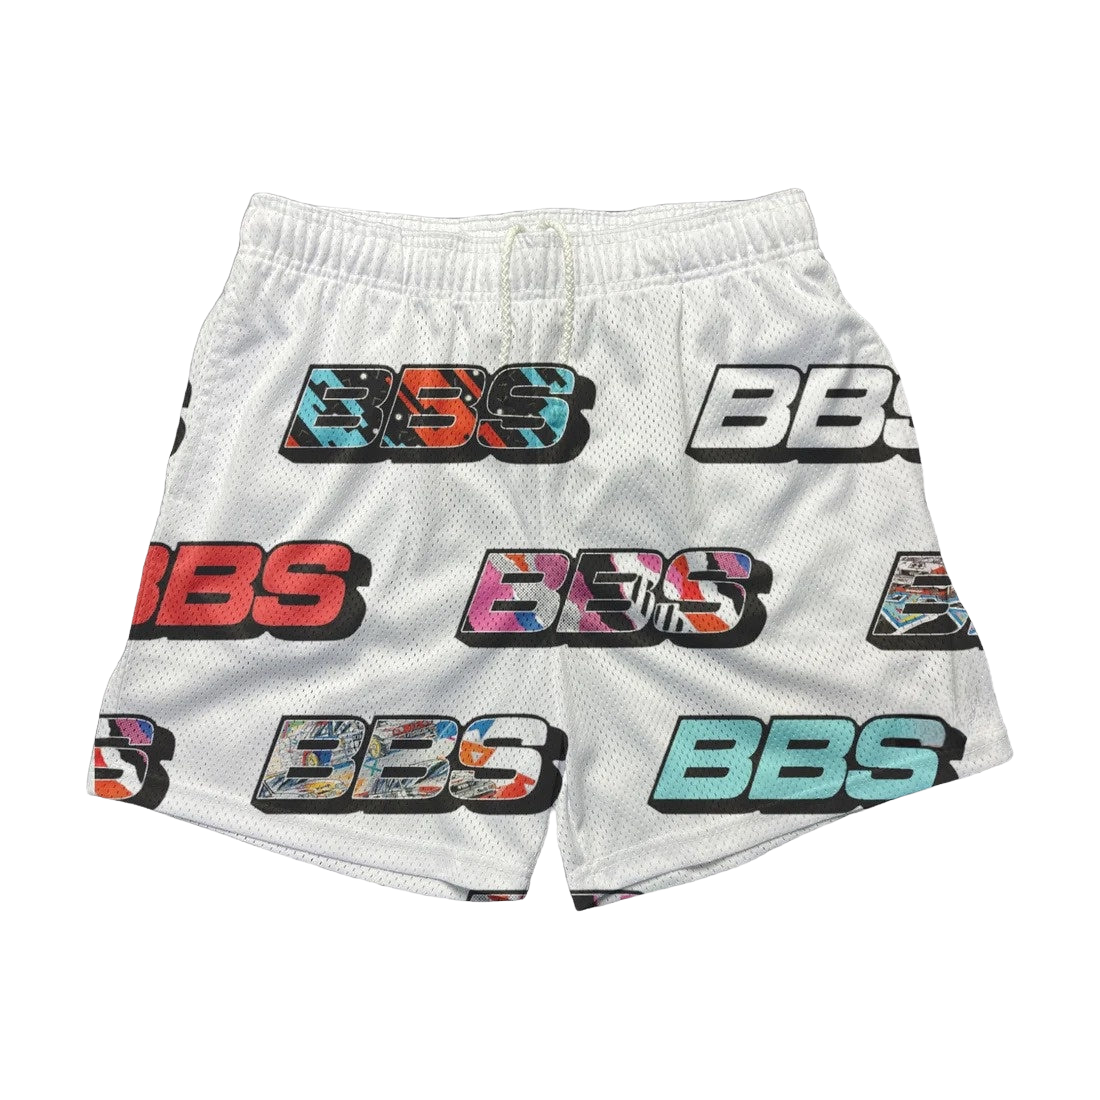 a white shorts with the bbs logo on it